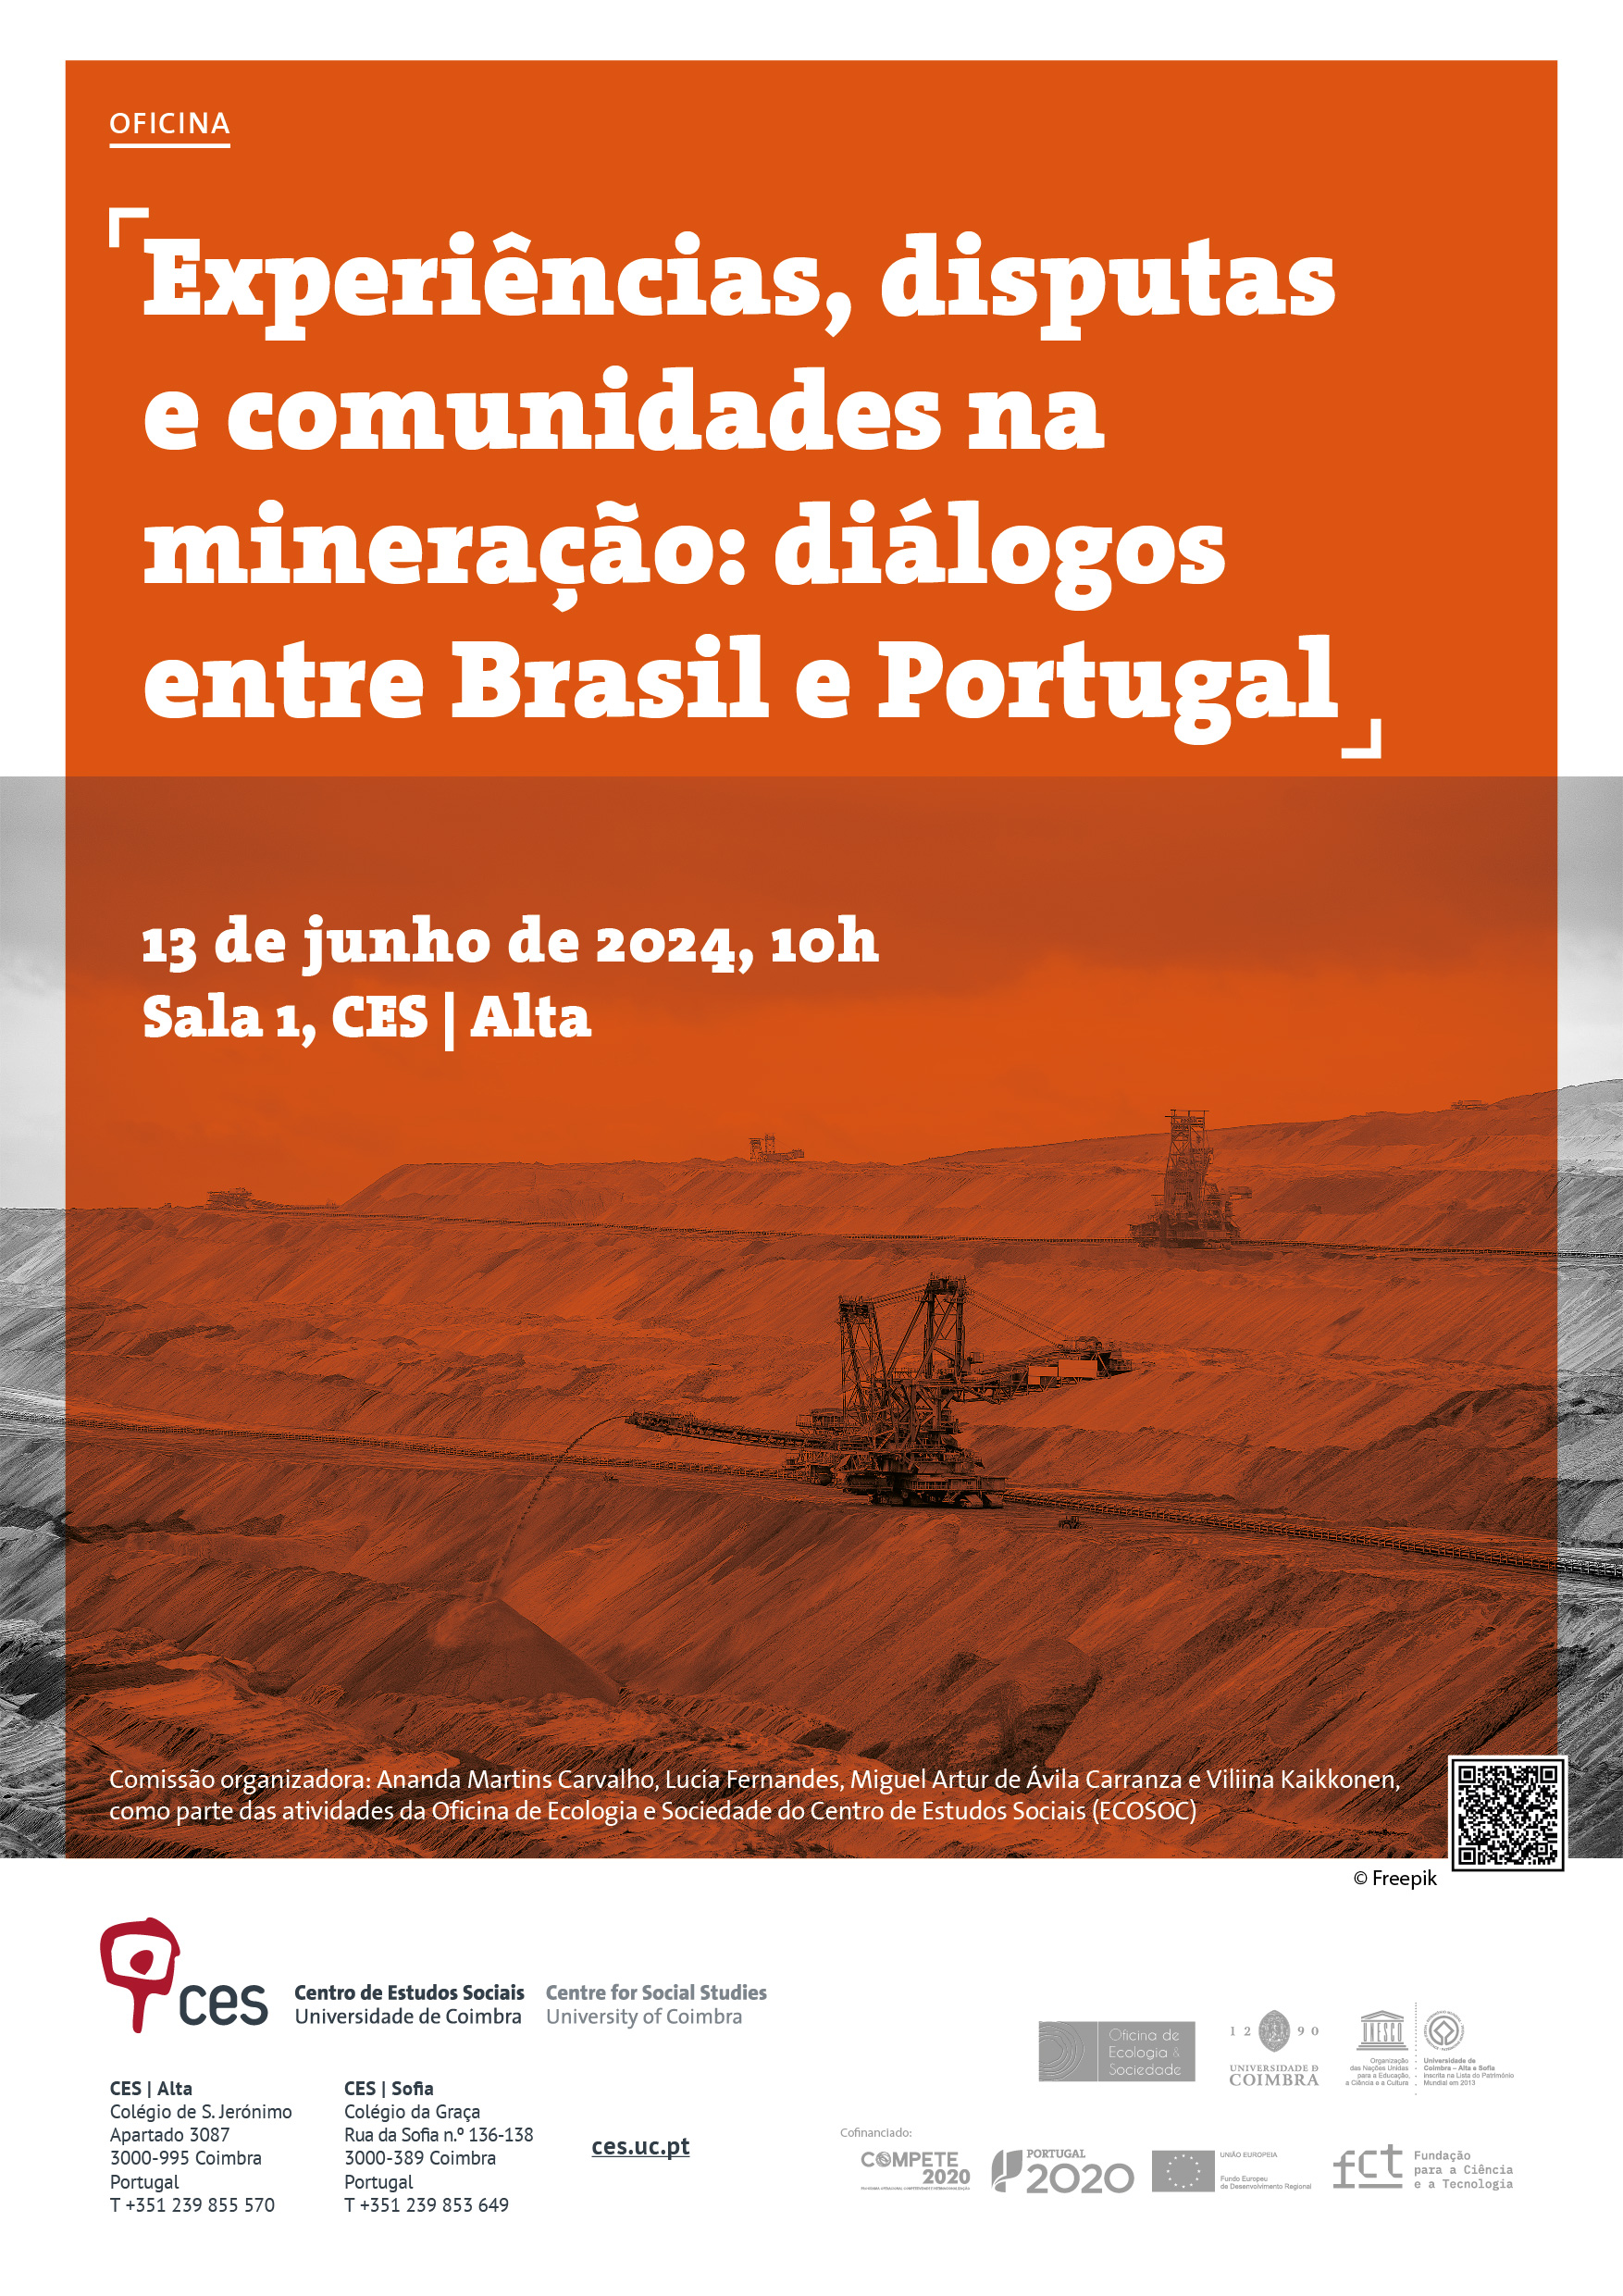 Experiences, disputes, and communities in mining: dialogues between Brazil and Portugal <span id="edit_45945"><script>$(function() { $('#edit_45945').load( "/myces/user/editobj.php?tipo=evento&id=45945" ); });</script></span>